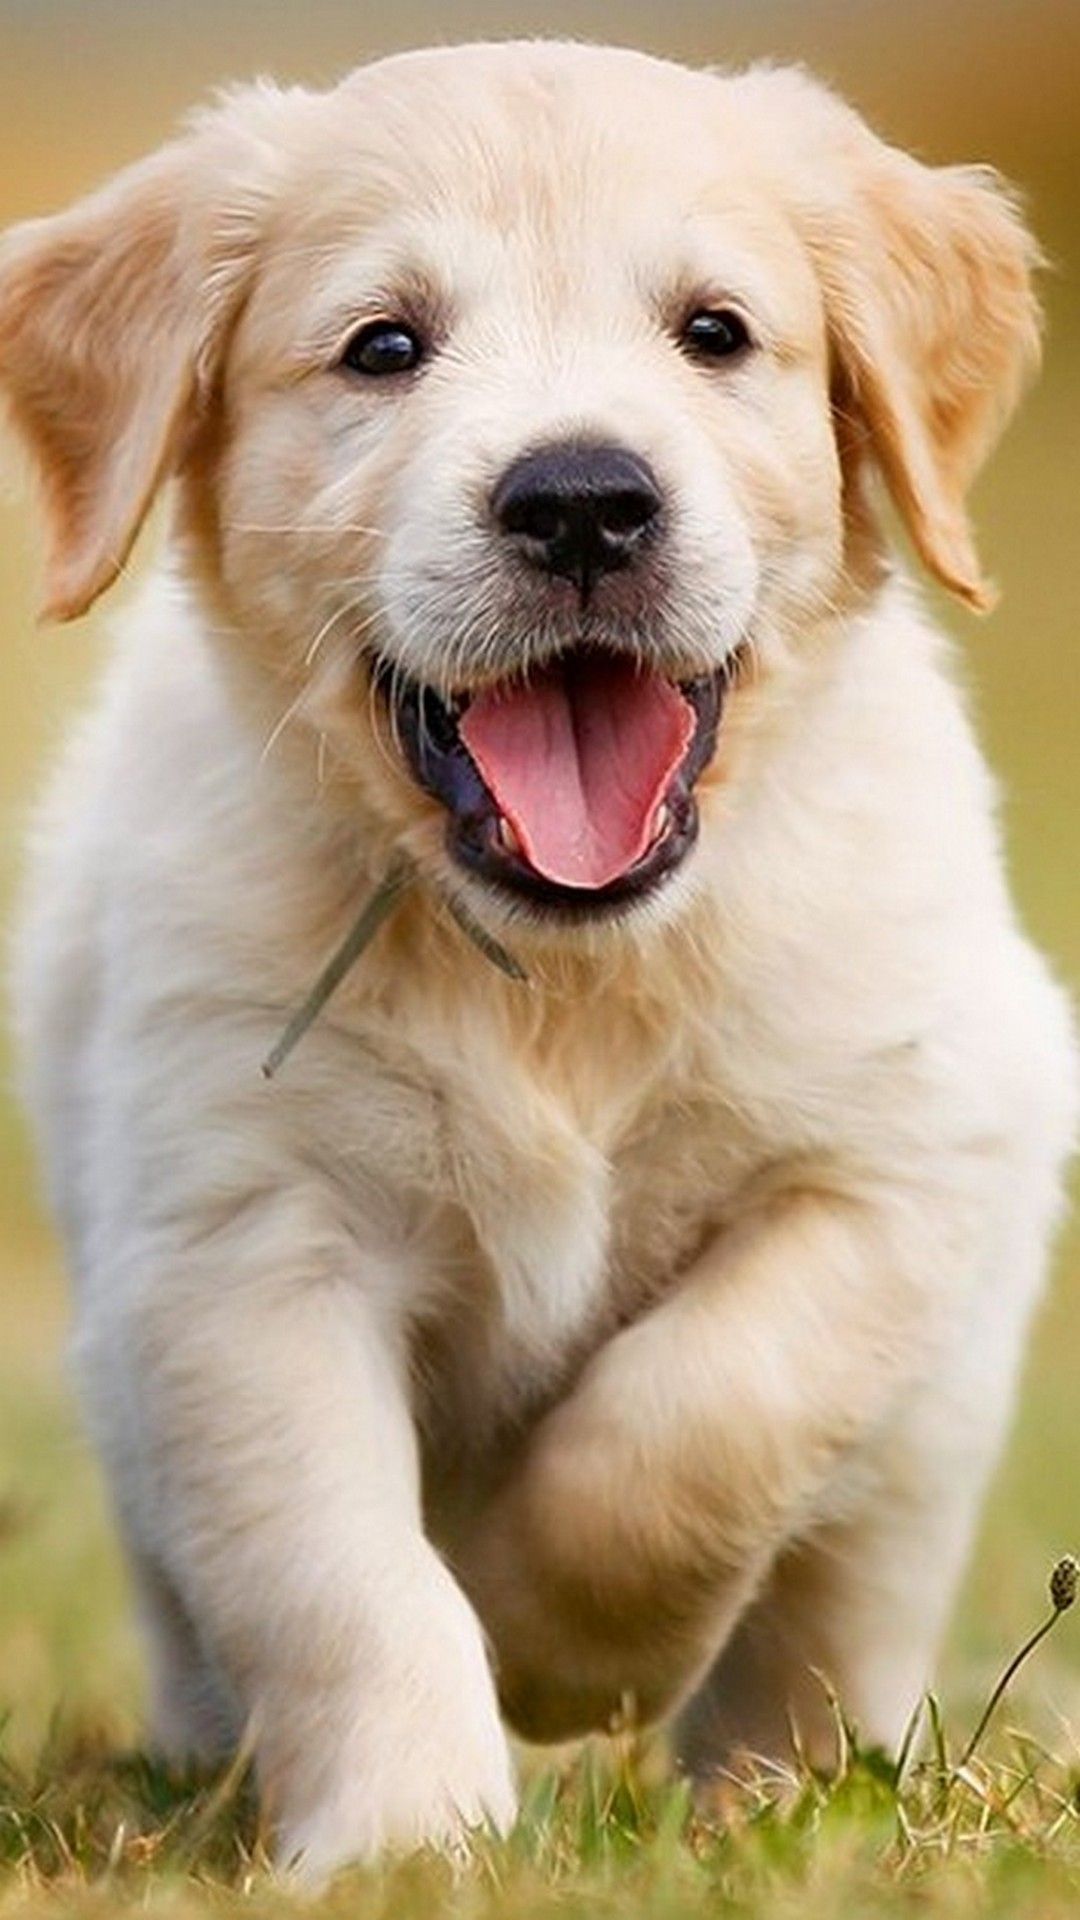 Free download Puppies Cellphone Wallpaper Best HD Wallpapers Cute puppy [1080x1920] for your